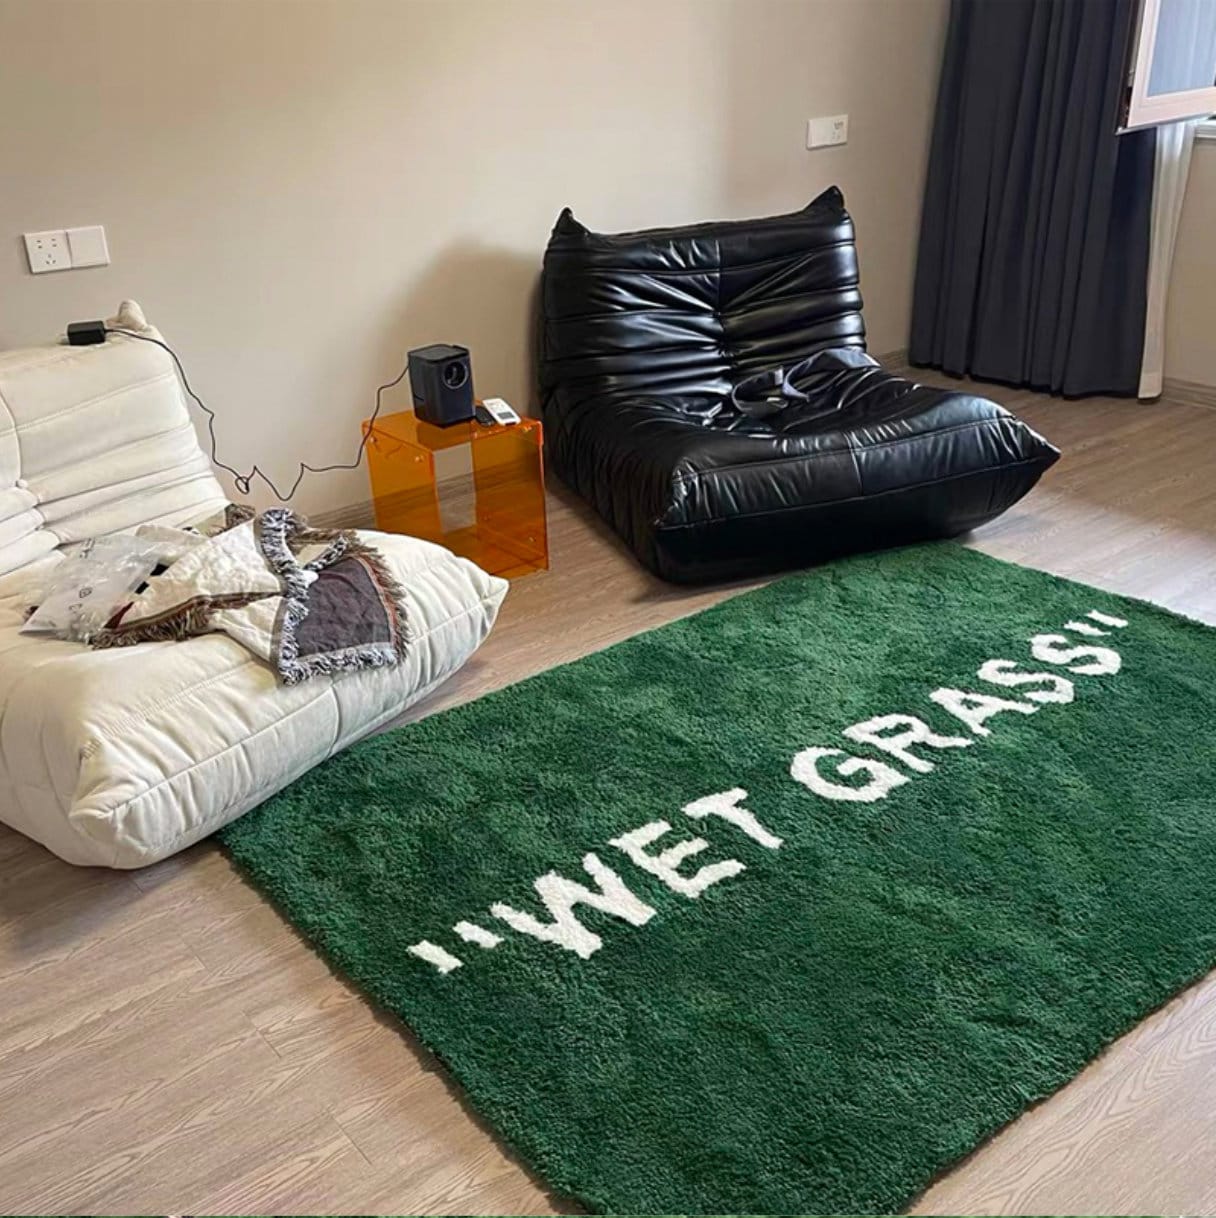 Off White Wet Grass Rug (Replica ) for Sale in Los Angeles, CA